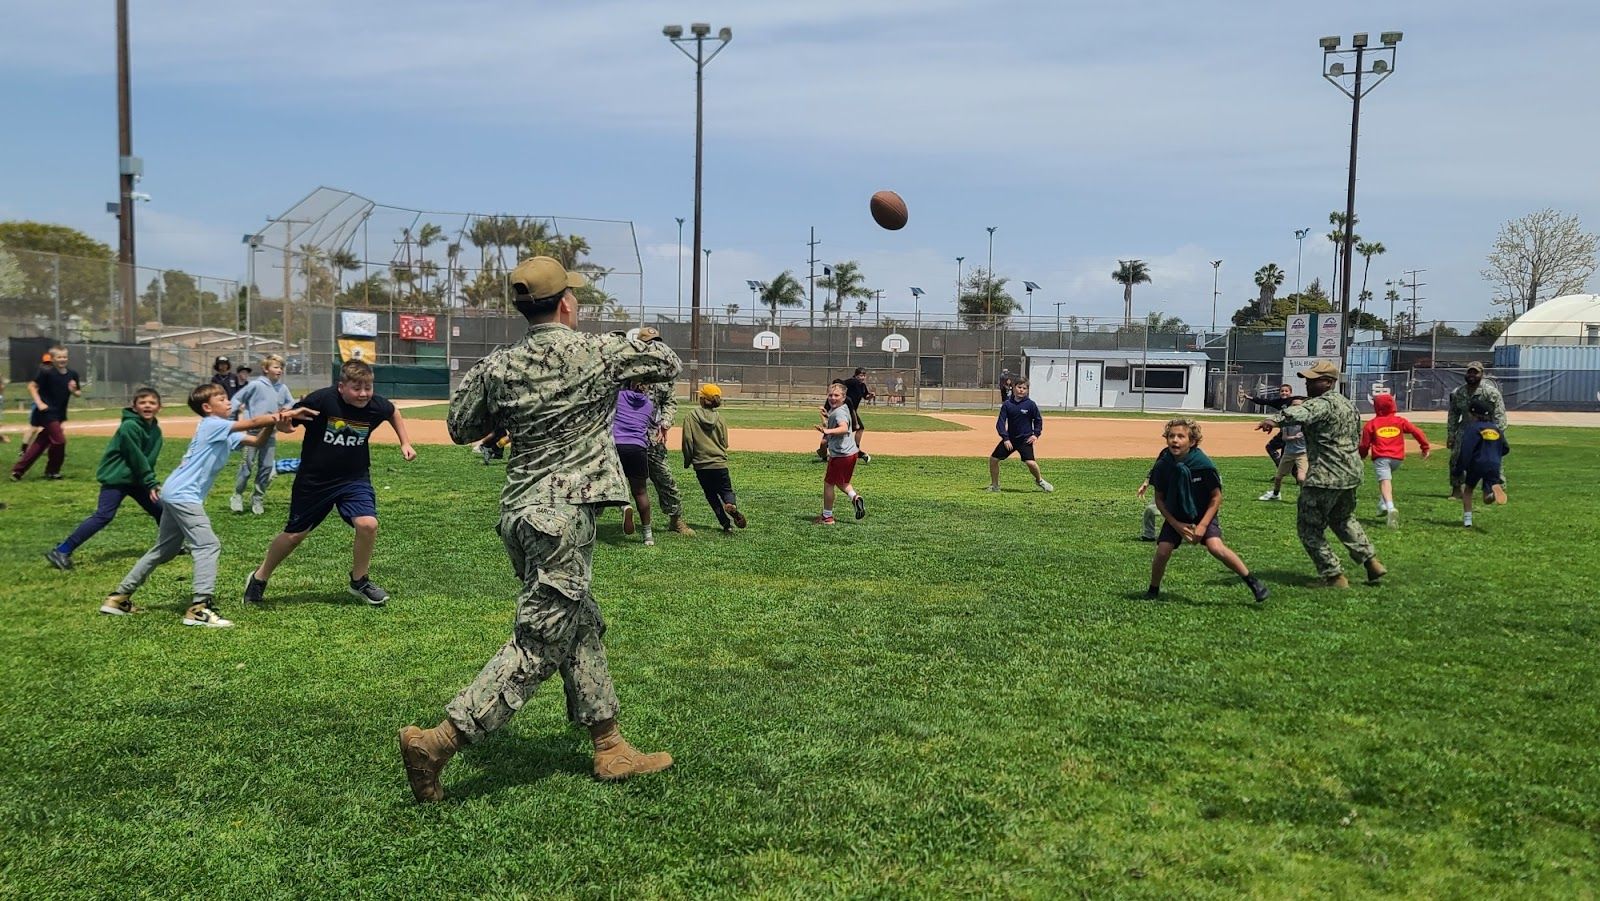 Active-duty military members visited J.H. McGaugh Elementary School as the campus hosted its 10th annual 'Week of the Military Child' from April 17-21. More than 100 military-connected students attend the school in Seal Beach. Photo by Cynthia Villa.